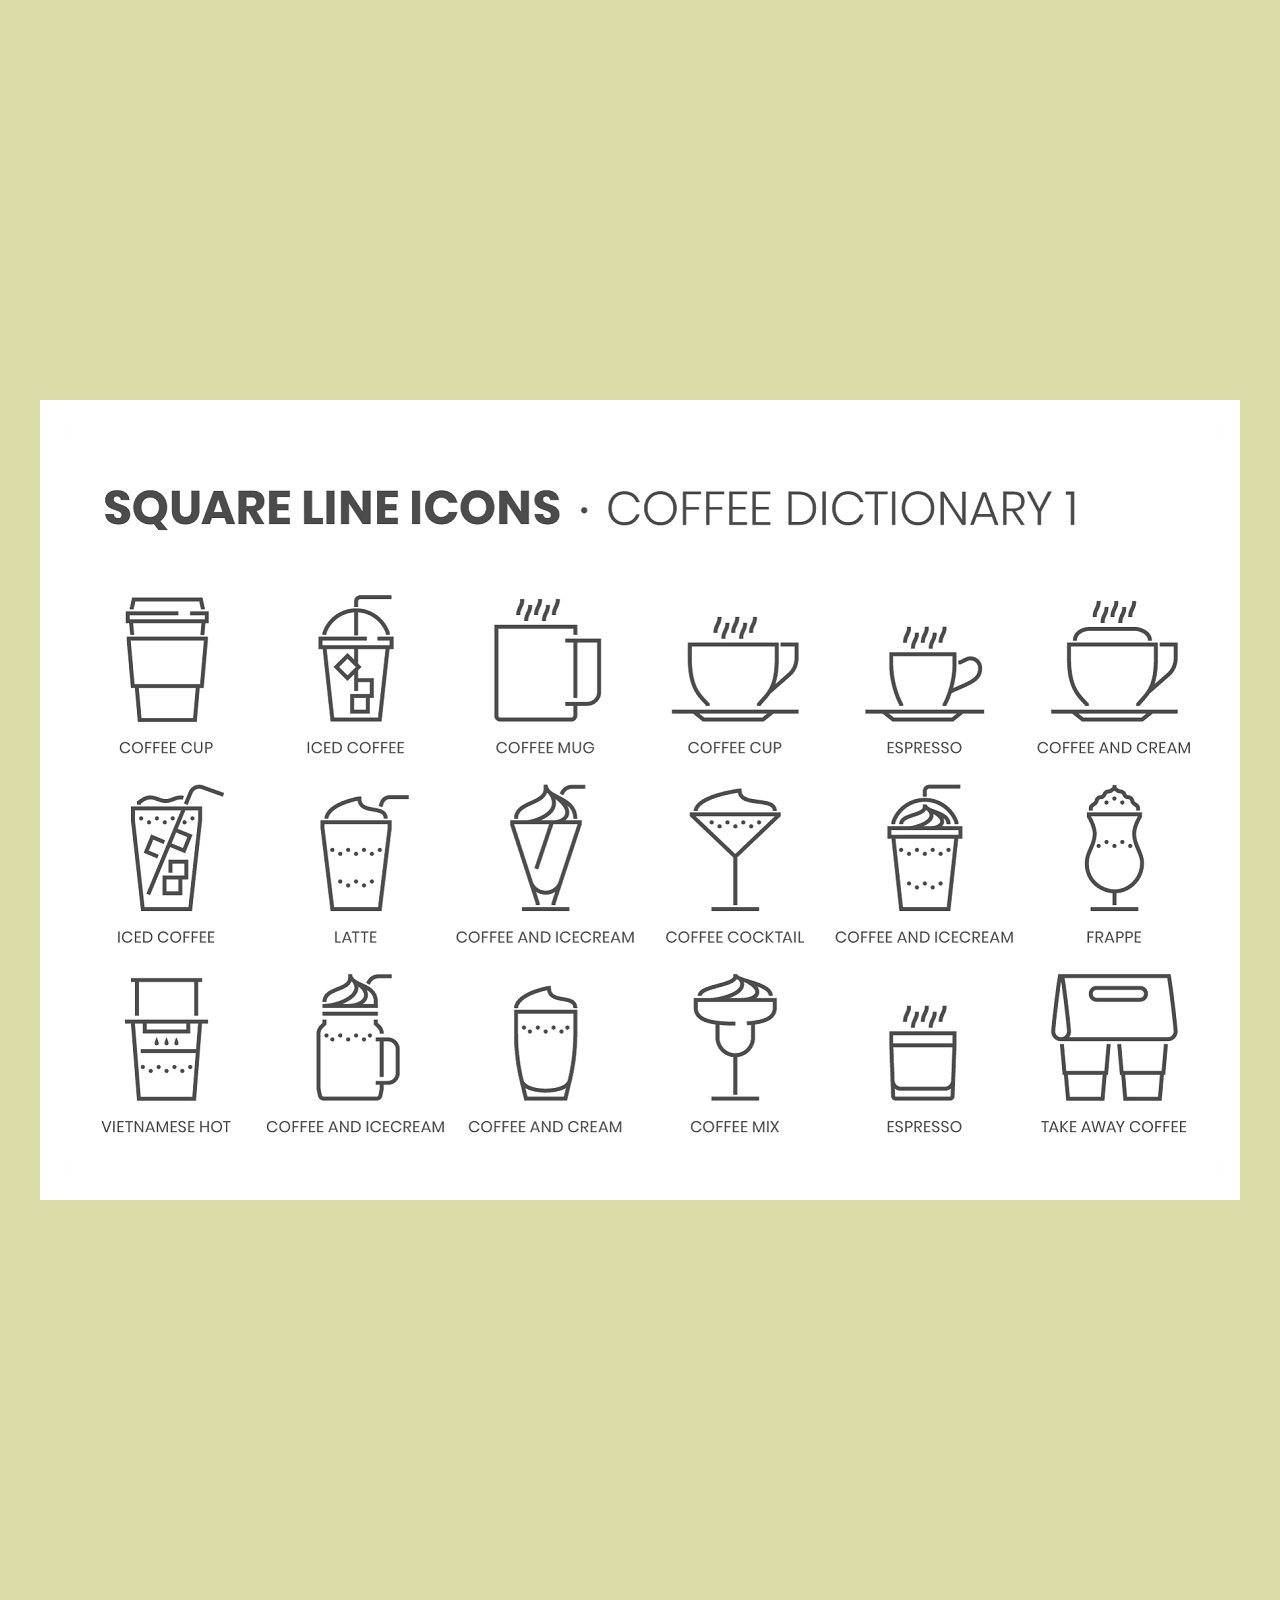 Coffee and tea 01 square line icons pinterest image.